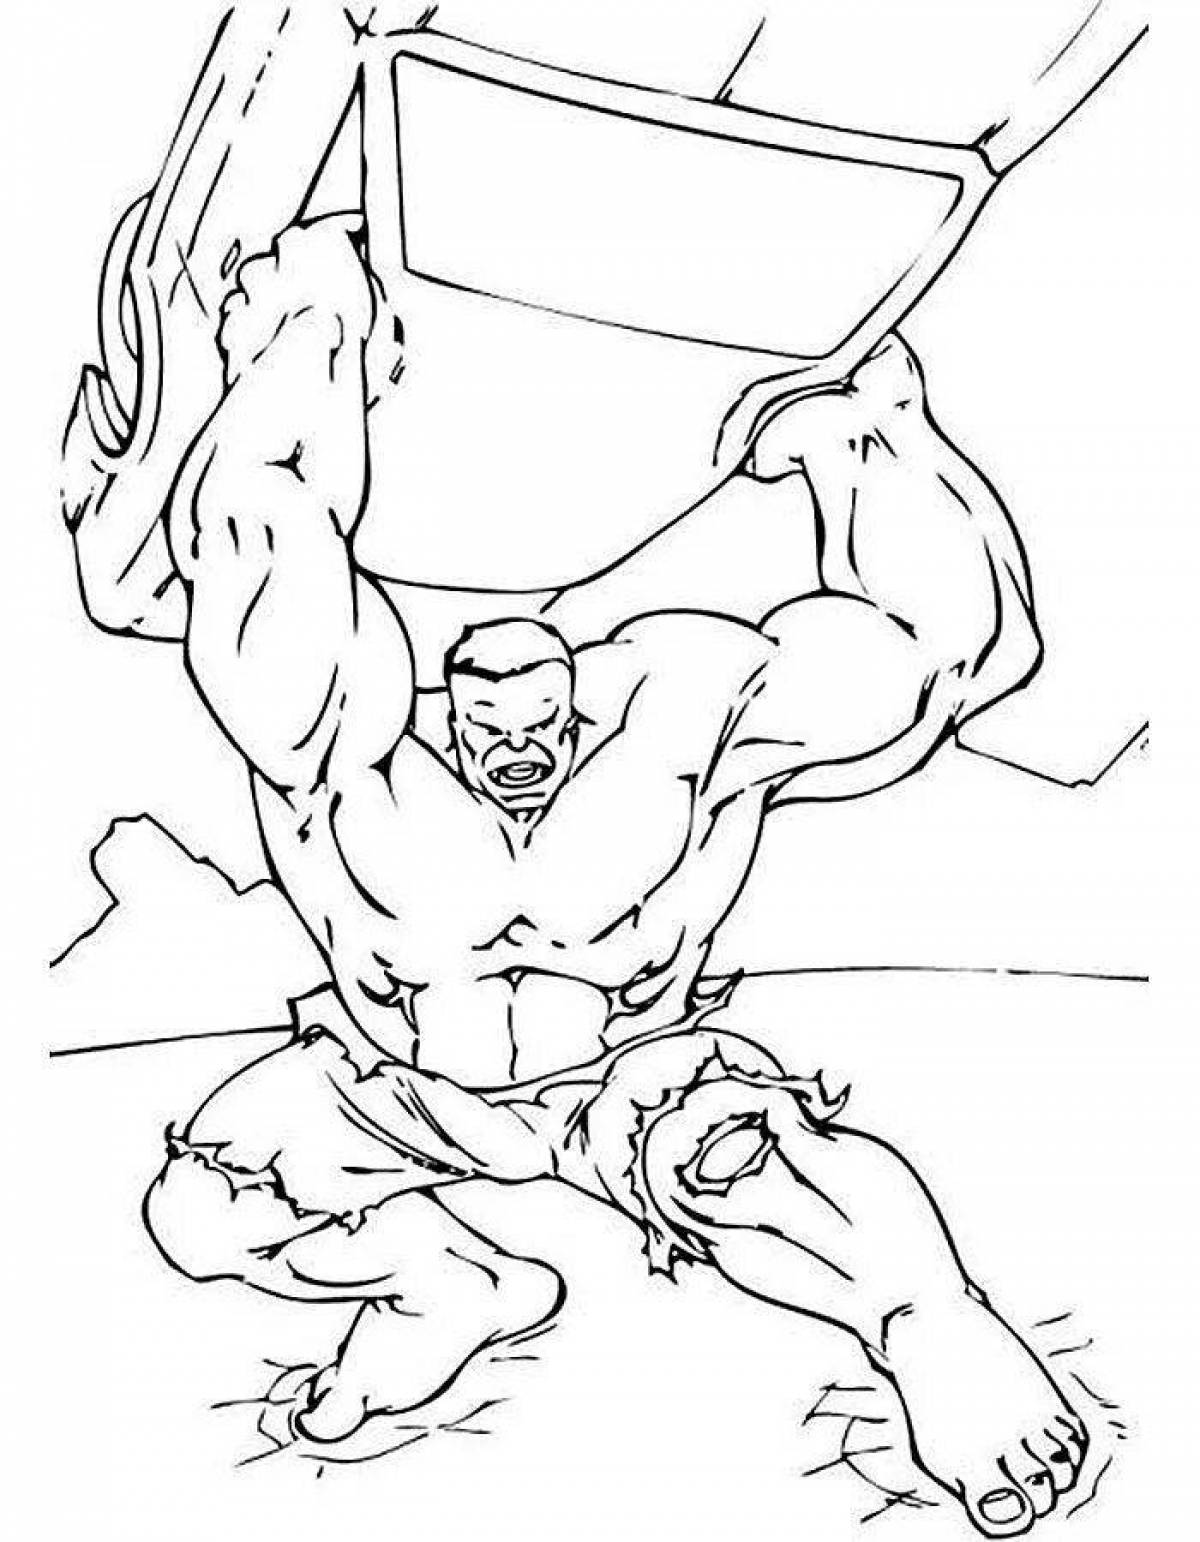 Brightly colored Hulk coloring book